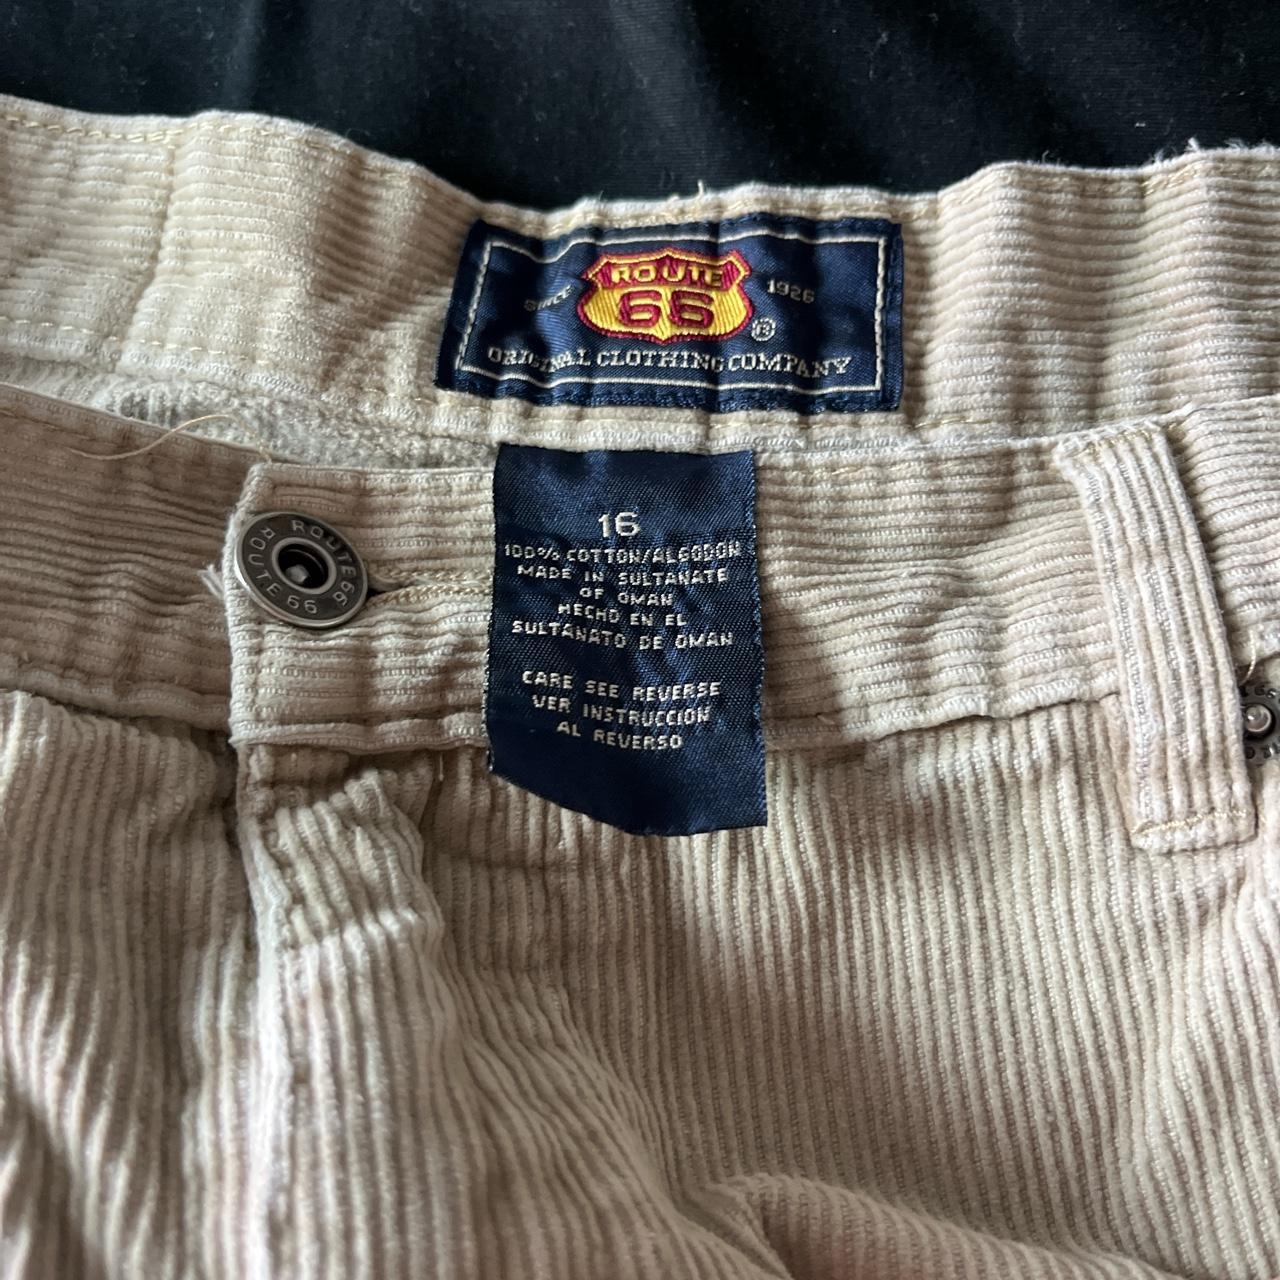 Super baggy Route 66 tan corduroy Tagged 16 but... - Depop